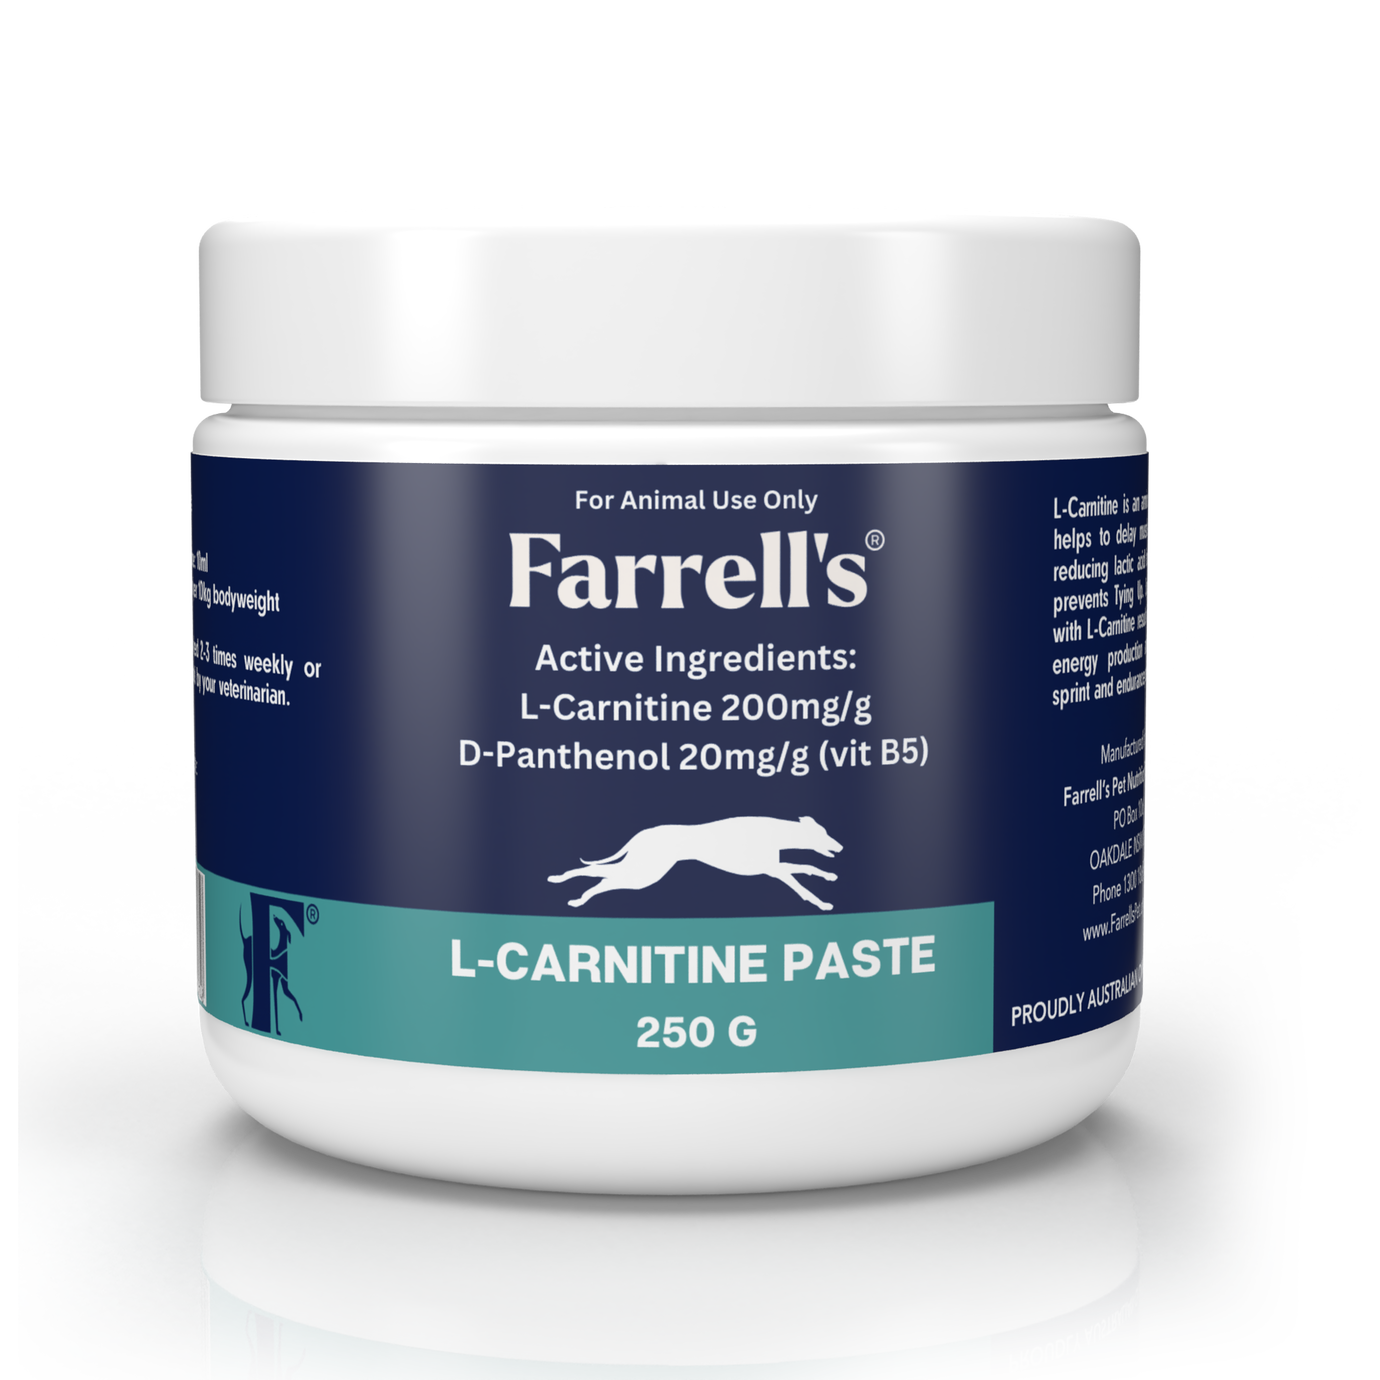 Farrell's Canine & Equine Supplements